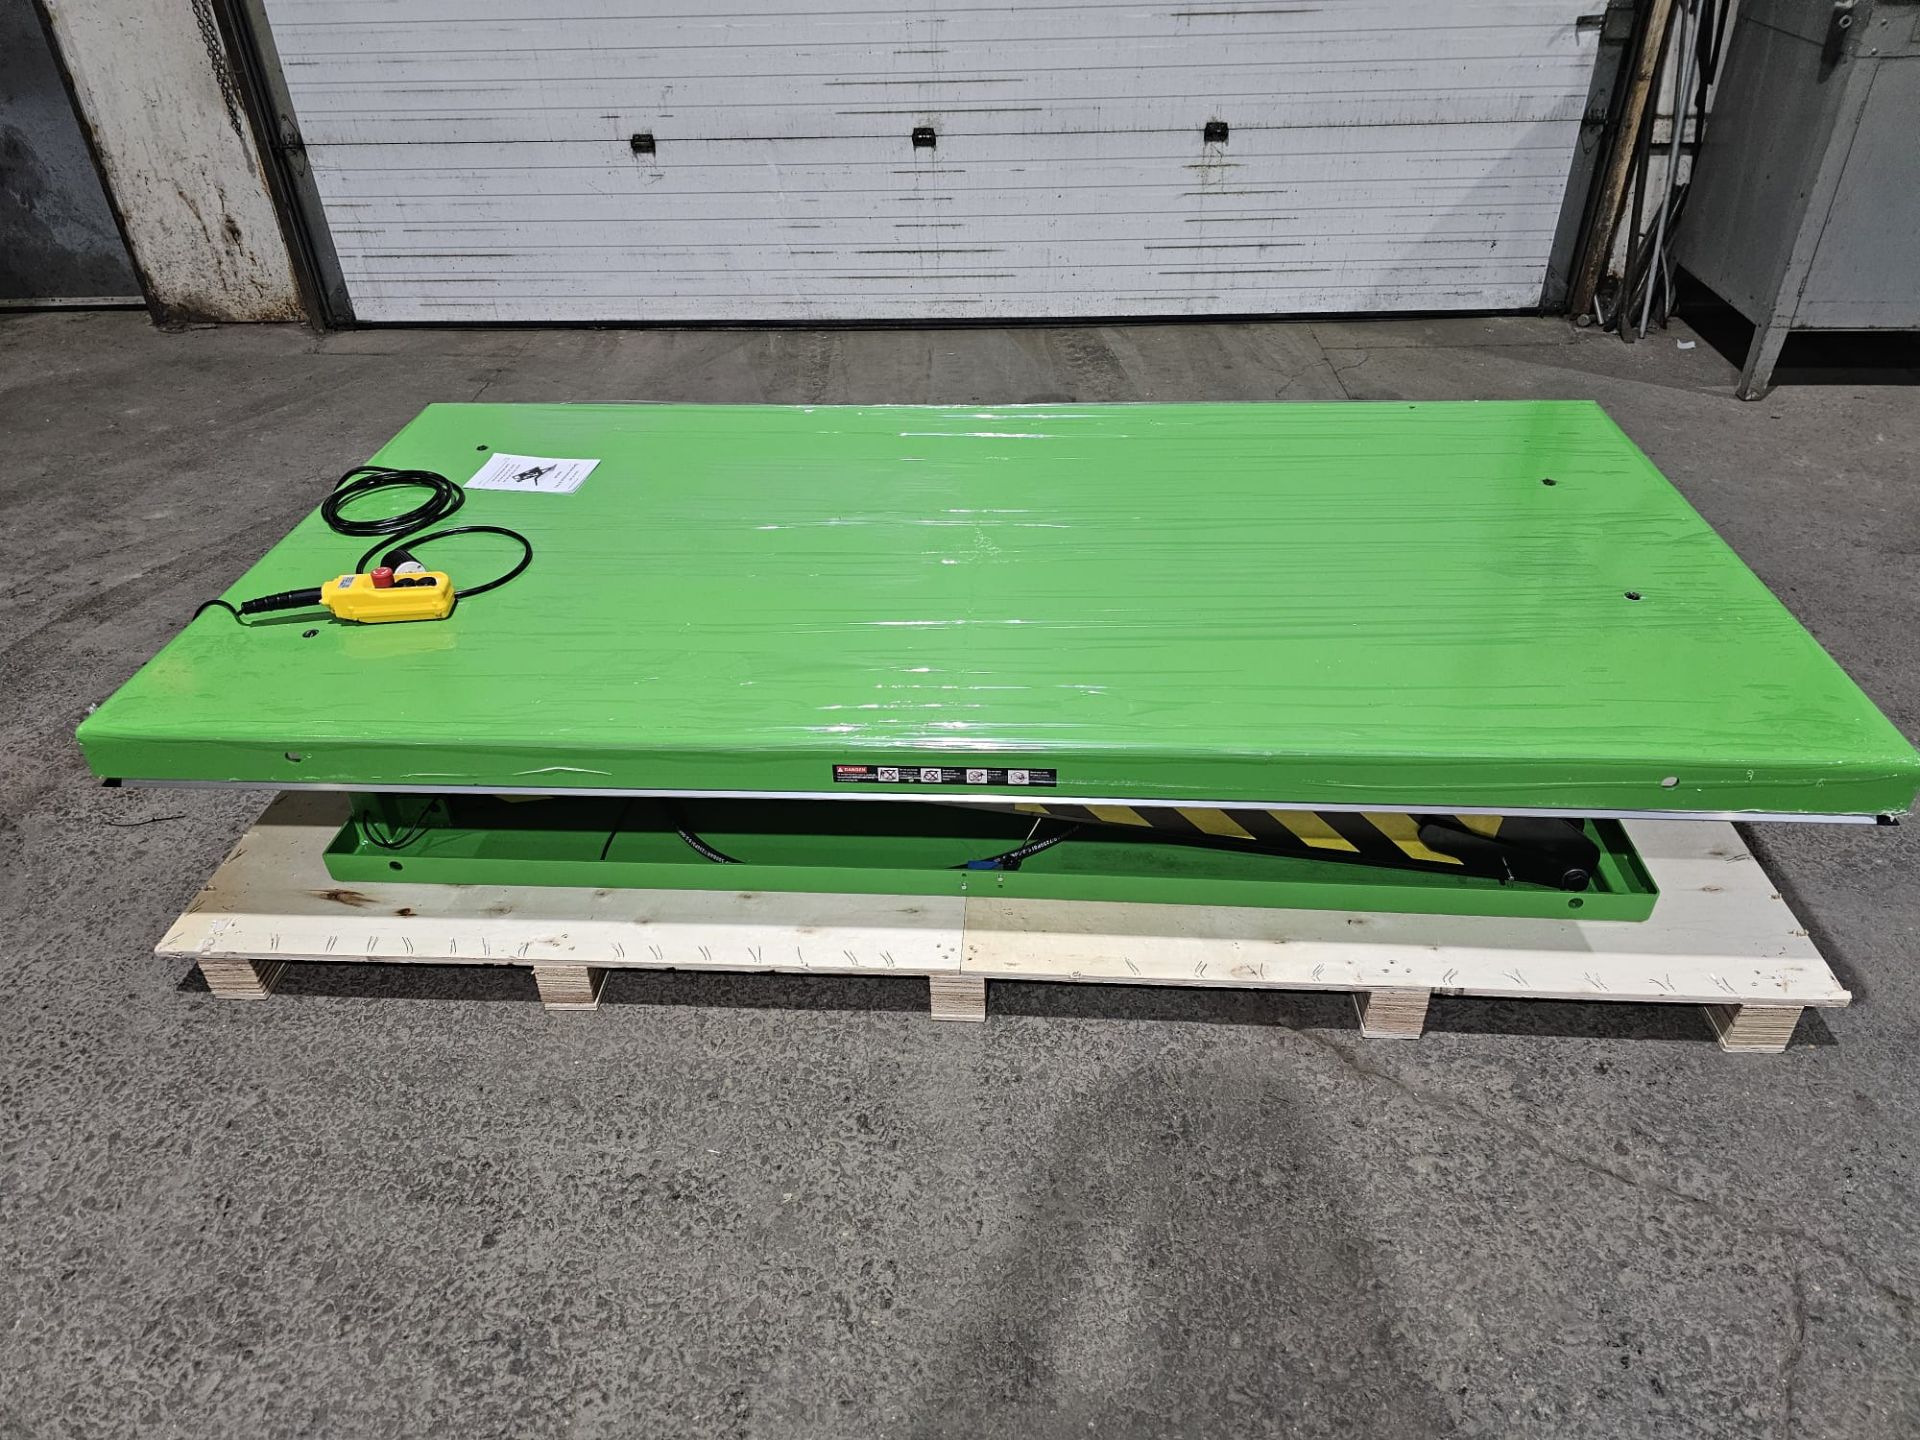 HW Hydraulic Lift Table 94" x 47" x 64" lift - 11,000lbs capacity - UNUSED and MINT - 220V - Image 2 of 5